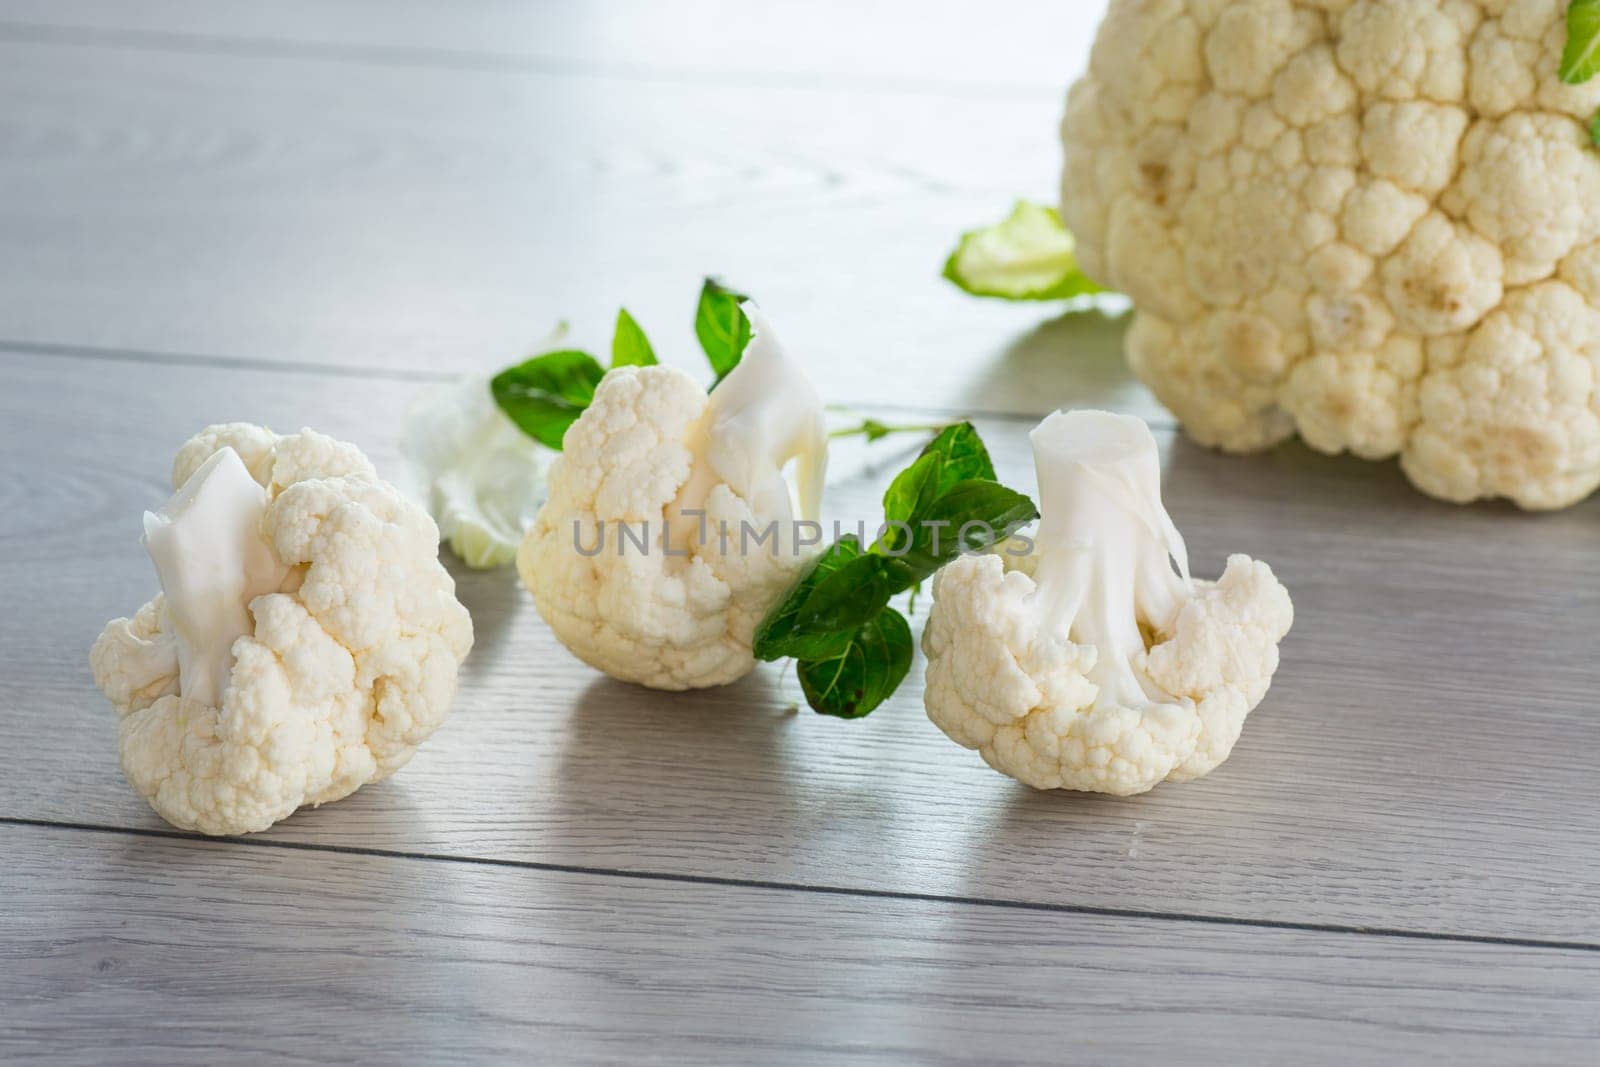 slices of raw small raw cauliflower on a light wooden table